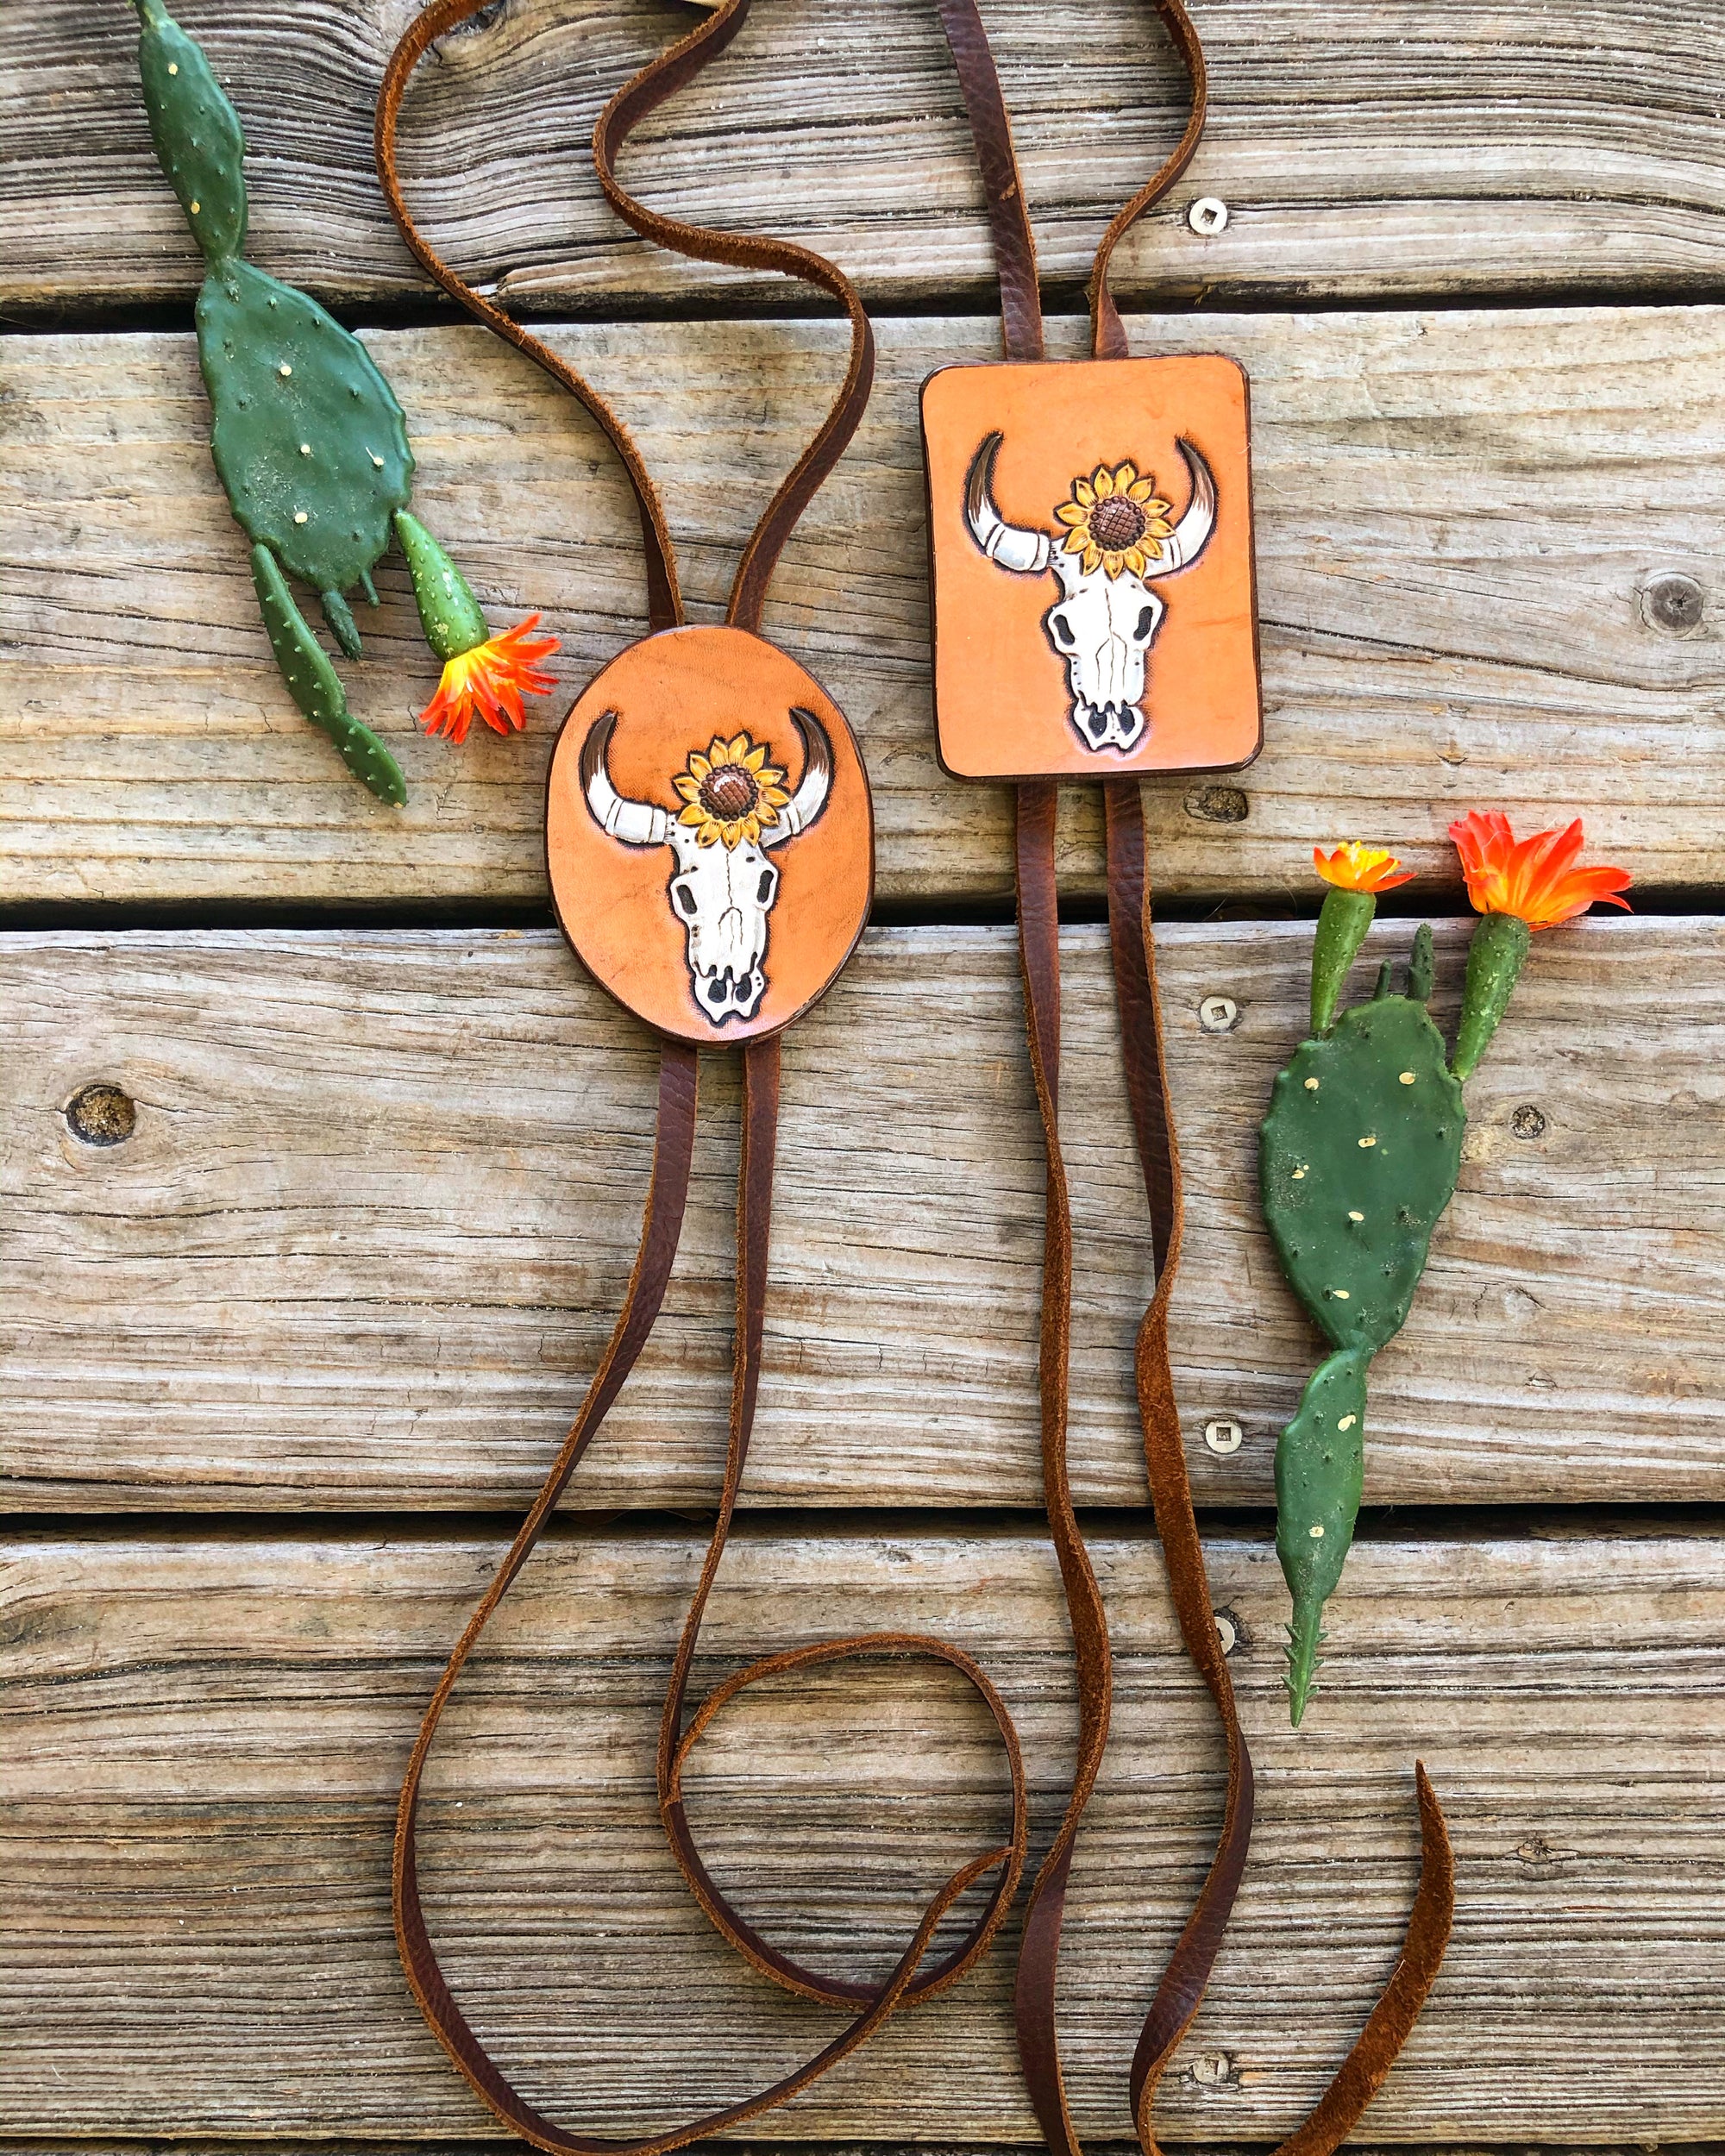 Lil Bee's Bohemian Tooled Leather Jumbo Bolo Necklaces